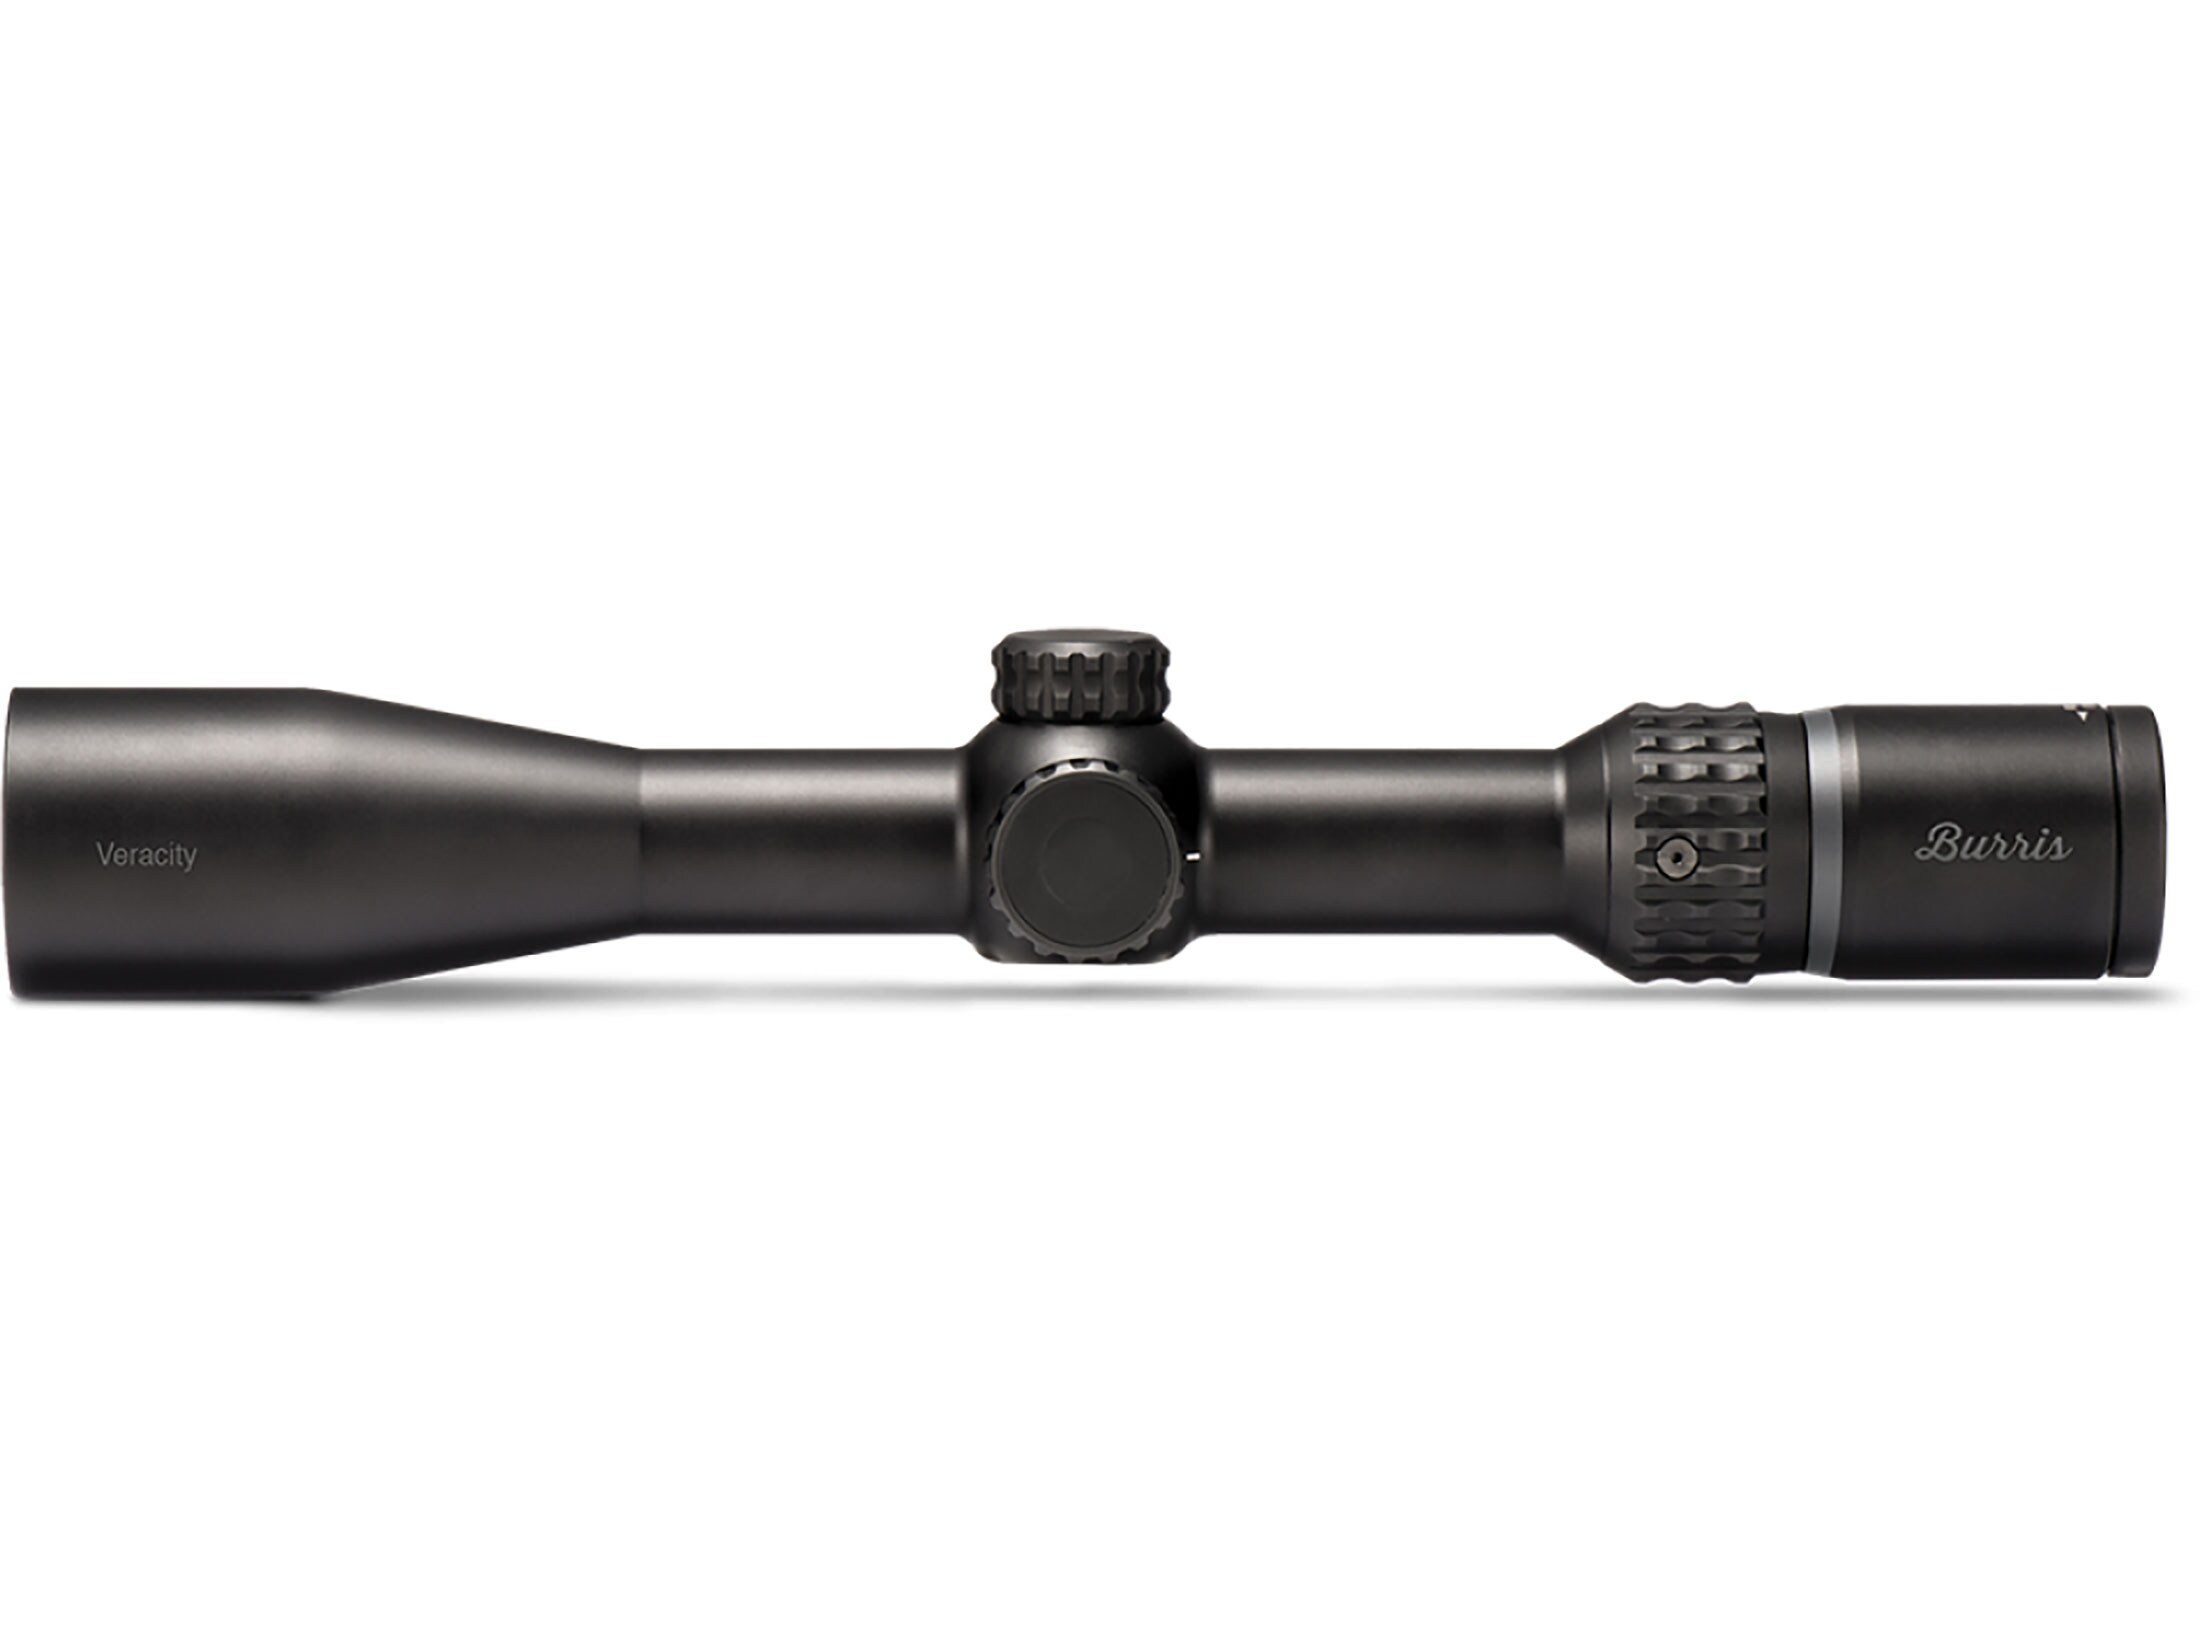 Burris Veracity Rifle Scope 30mm Tube 2-10x 42mm M.A.D Low Turret System First Focal Ballistic E1 Reticle Matte For Sale